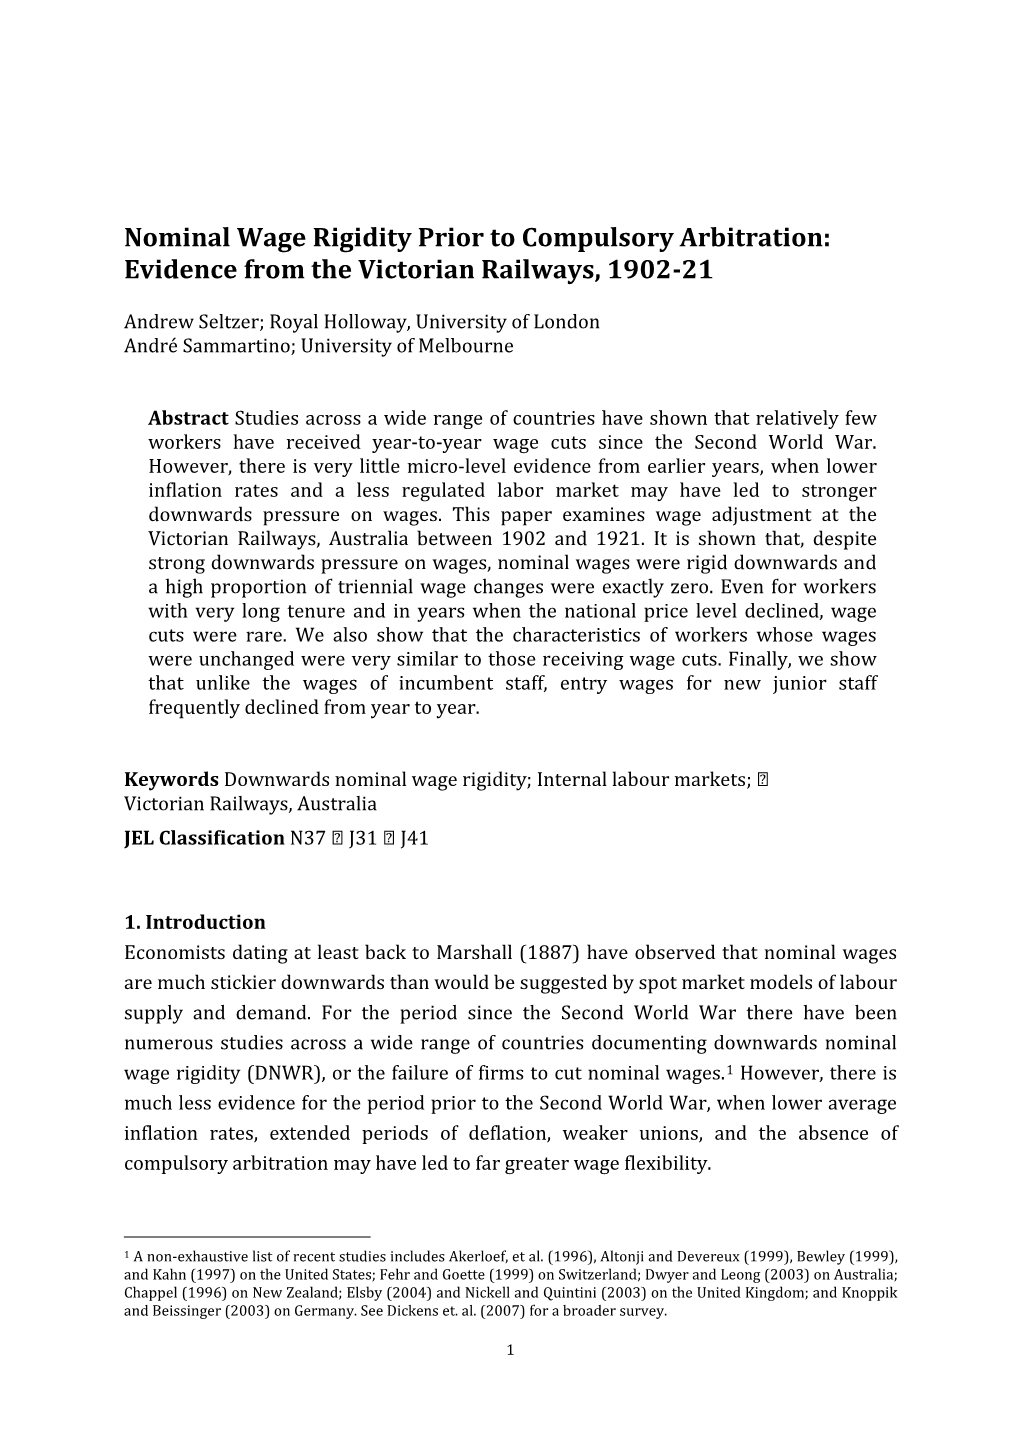 Nominal Wage Rigidity Prior to Compulsory Arbitration: Evidence from the Victorian Railways, 1902-21